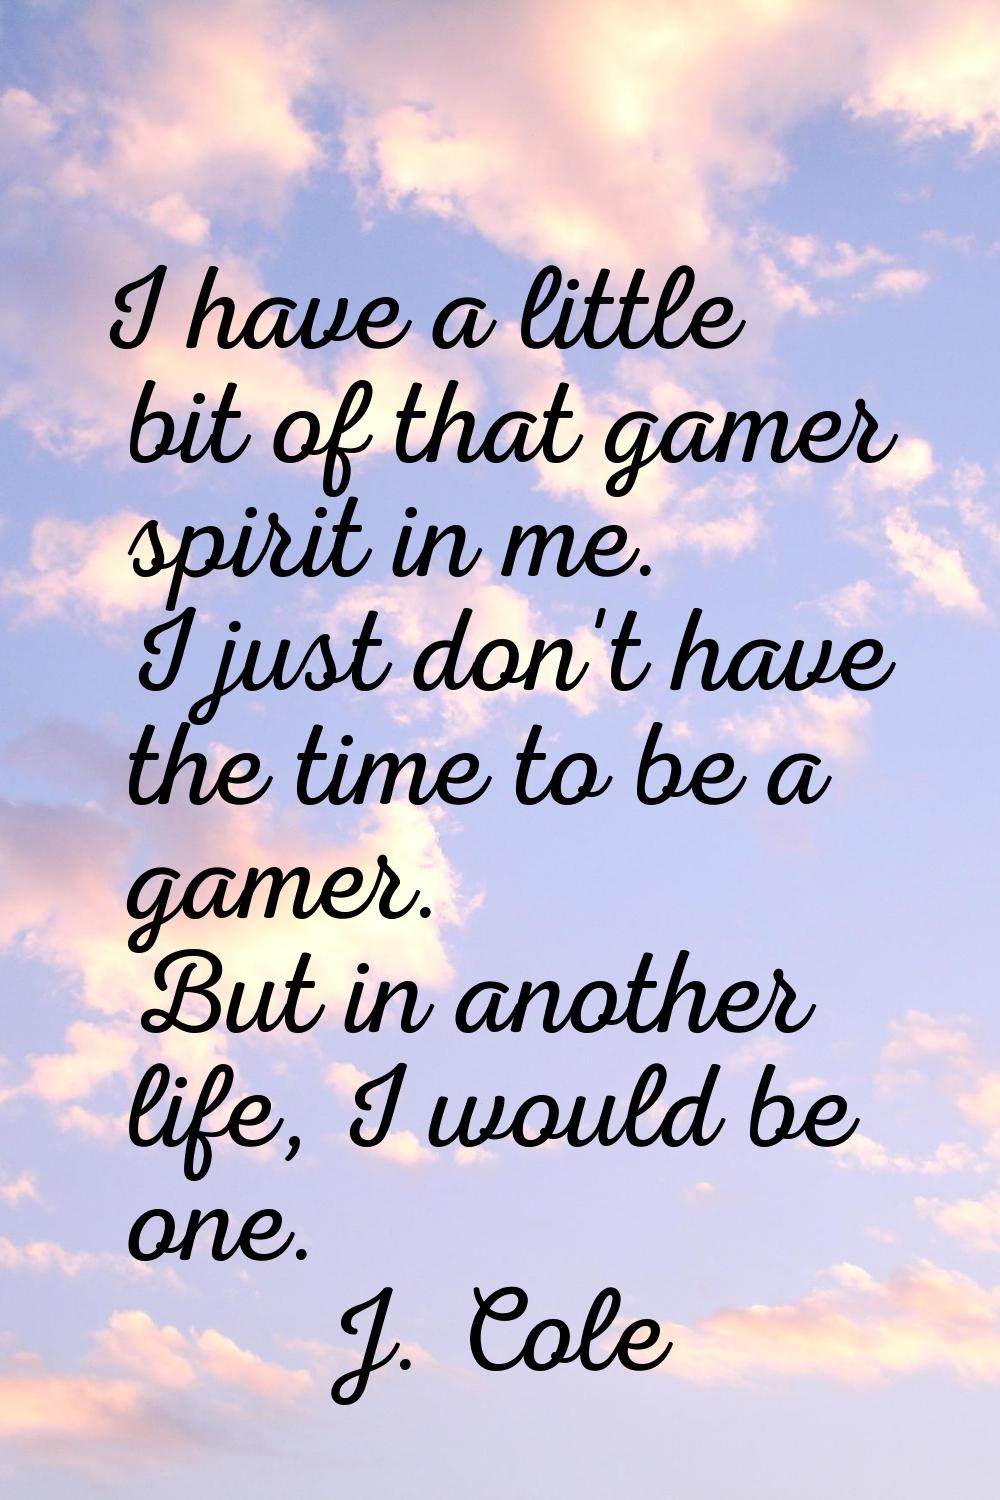 I have a little bit of that gamer spirit in me. I just don't have the time to be a gamer. But in an